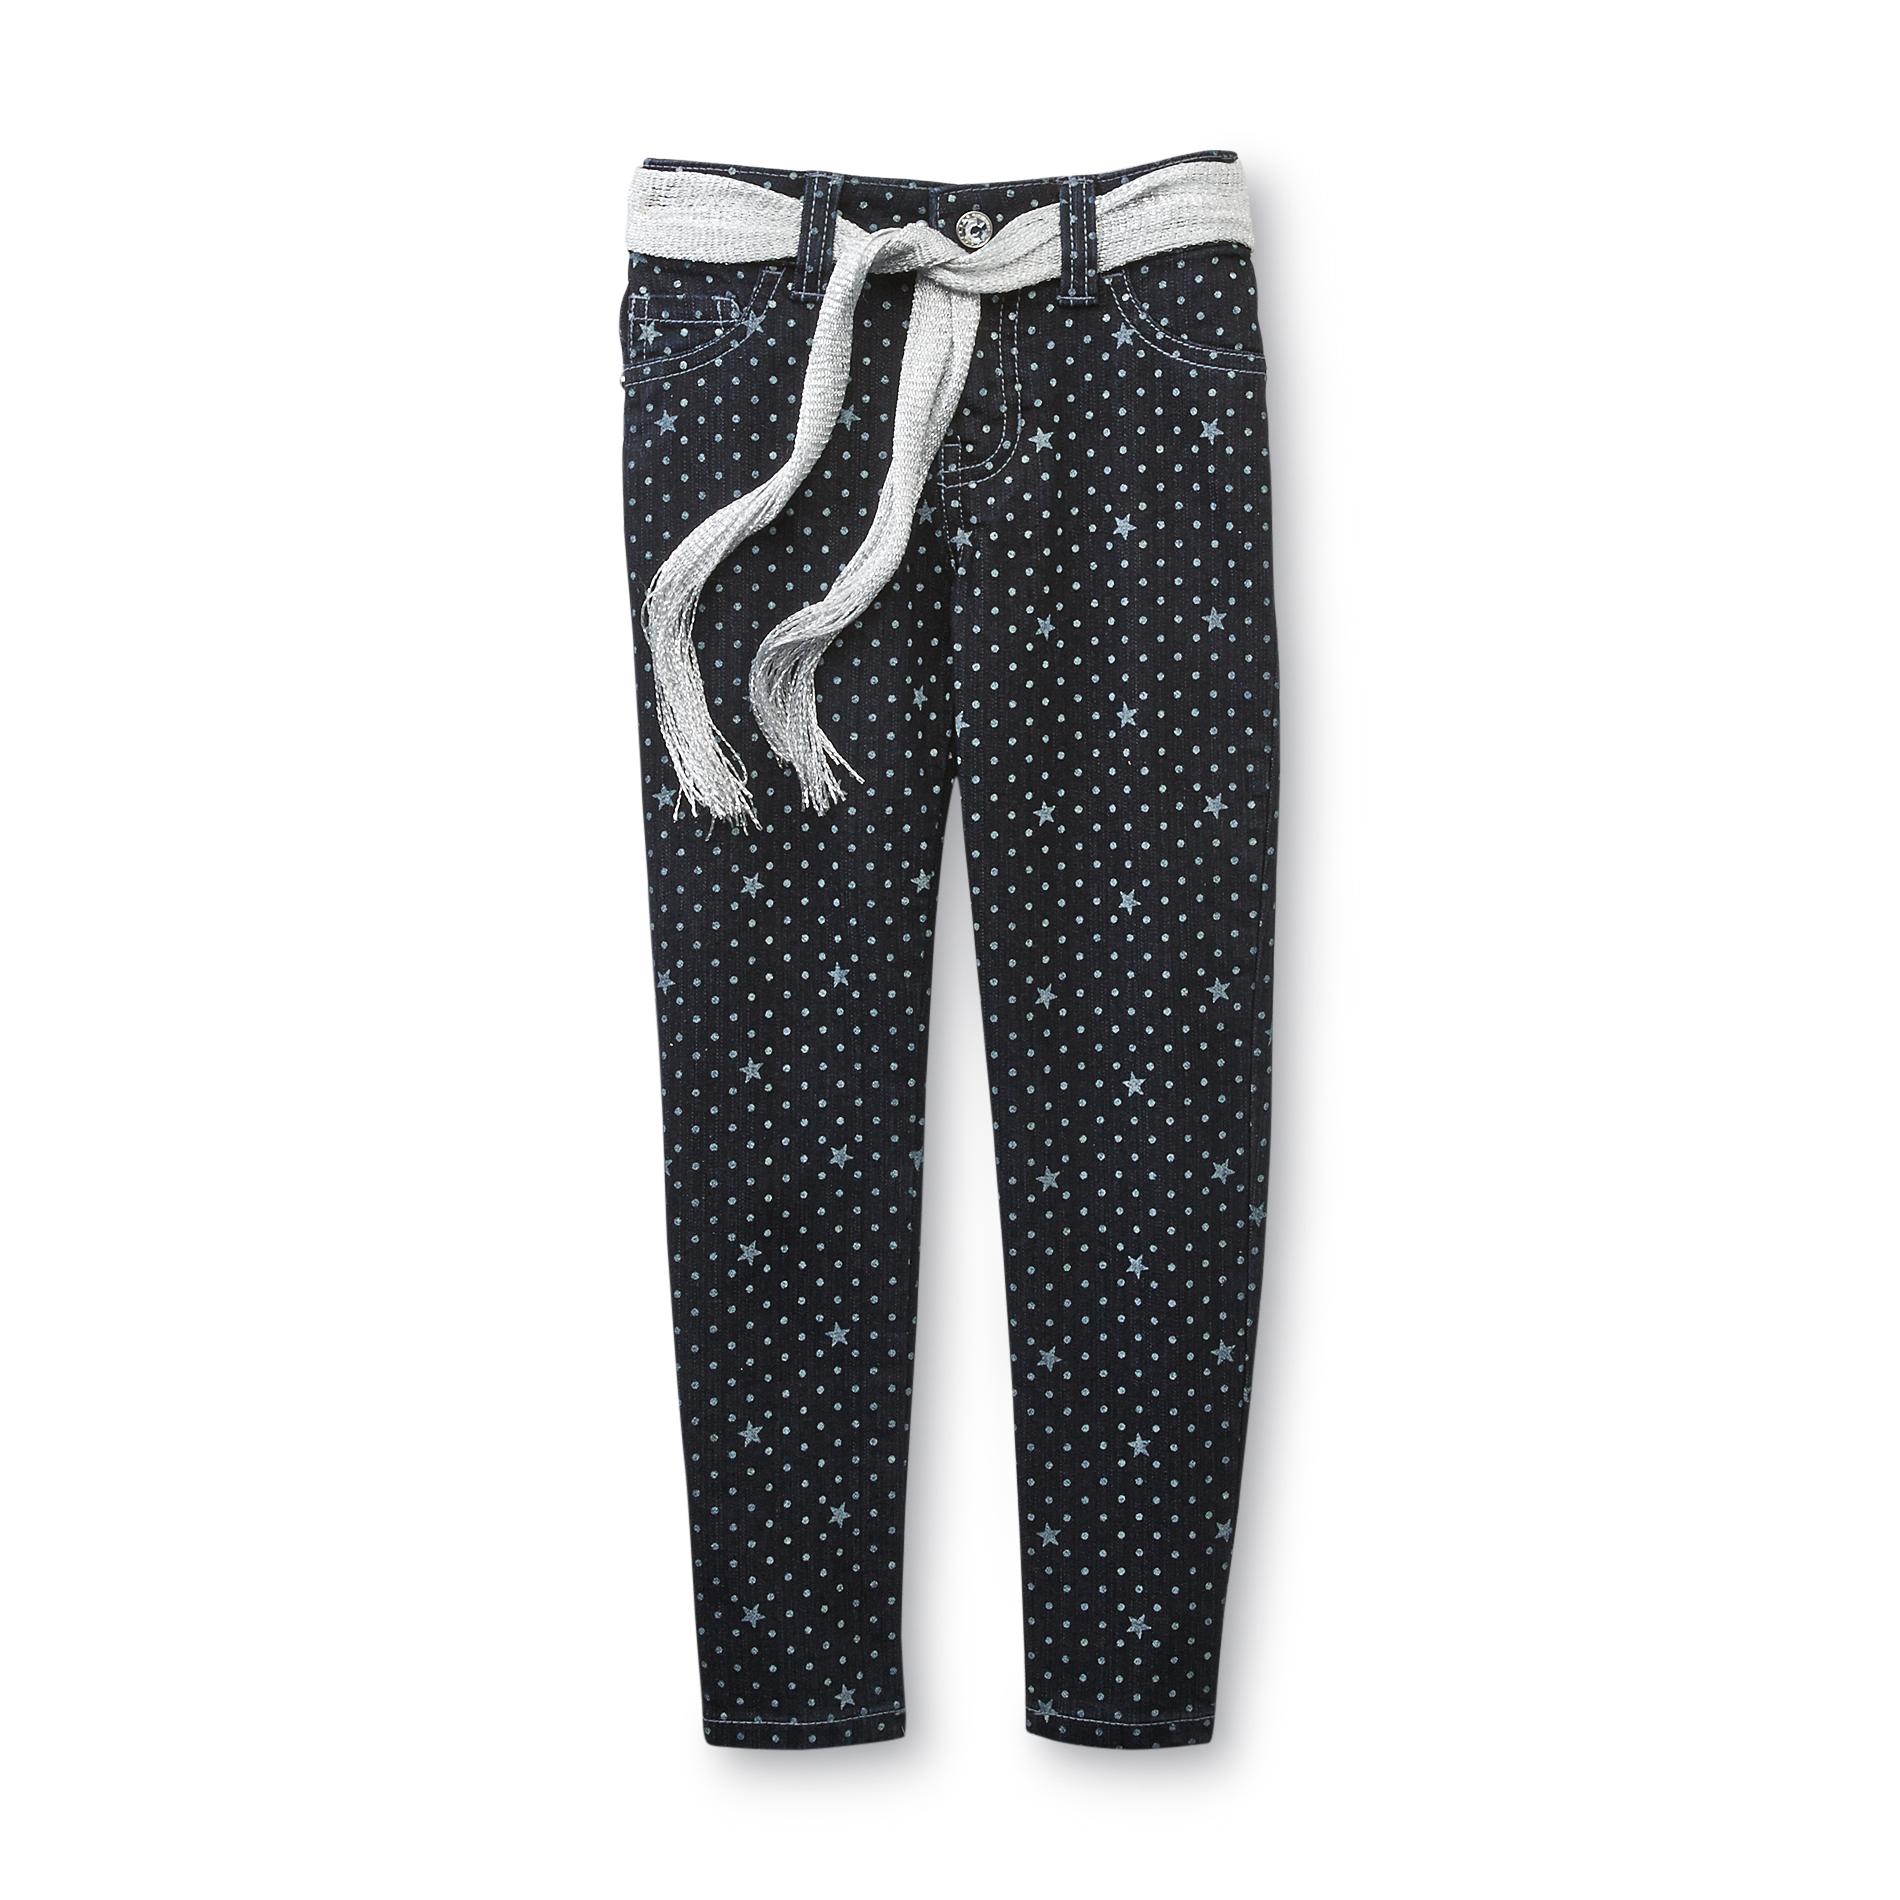 Route 66 Girl's Printed Jeans & Belt - Dots & Stars